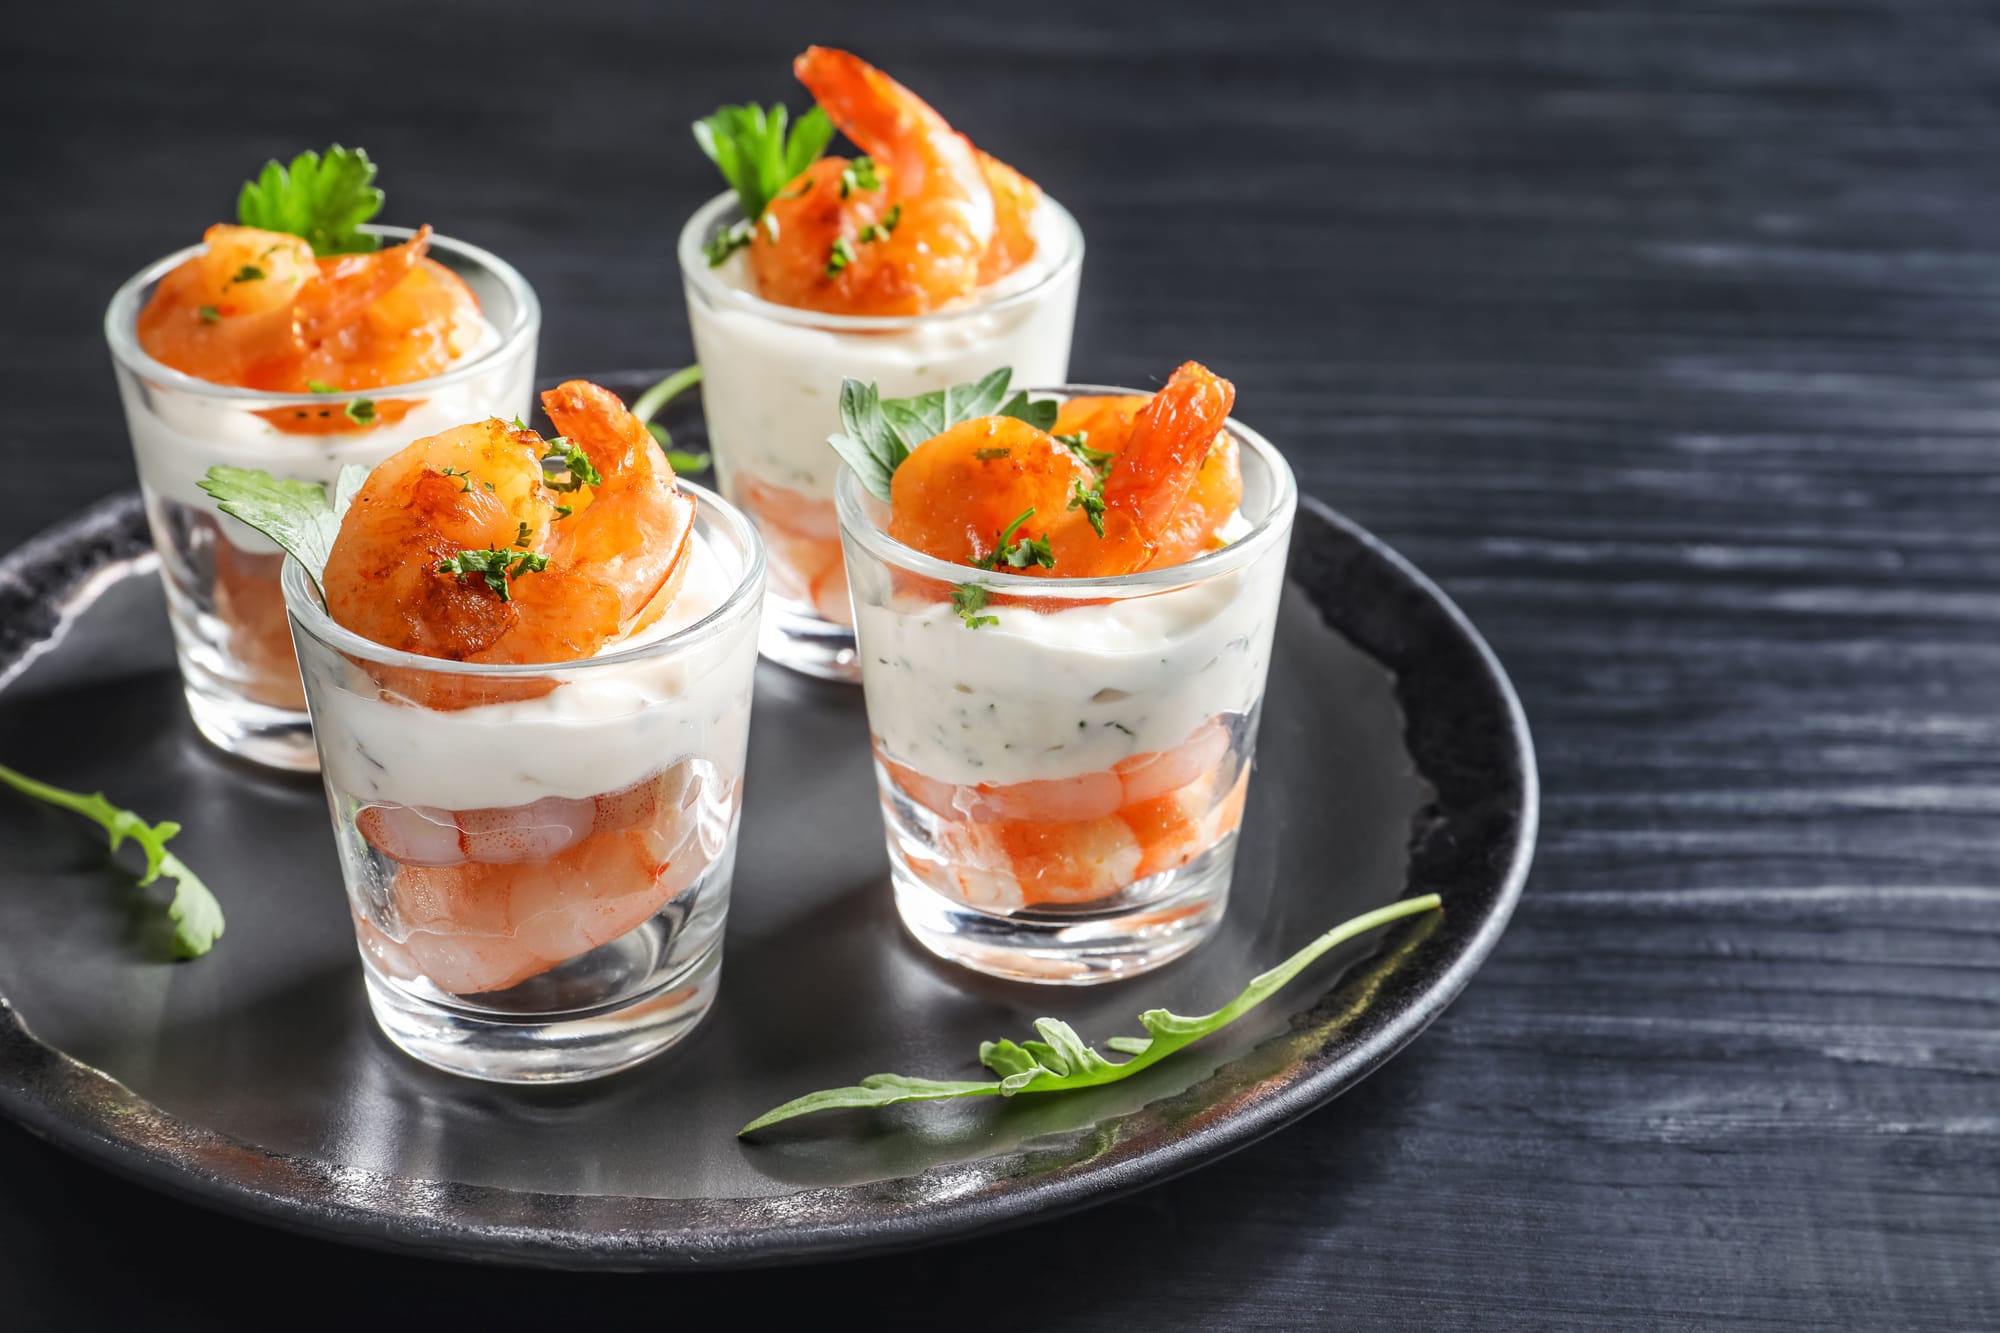 Prawn and Ricotta Mousse with Smoked Salmon